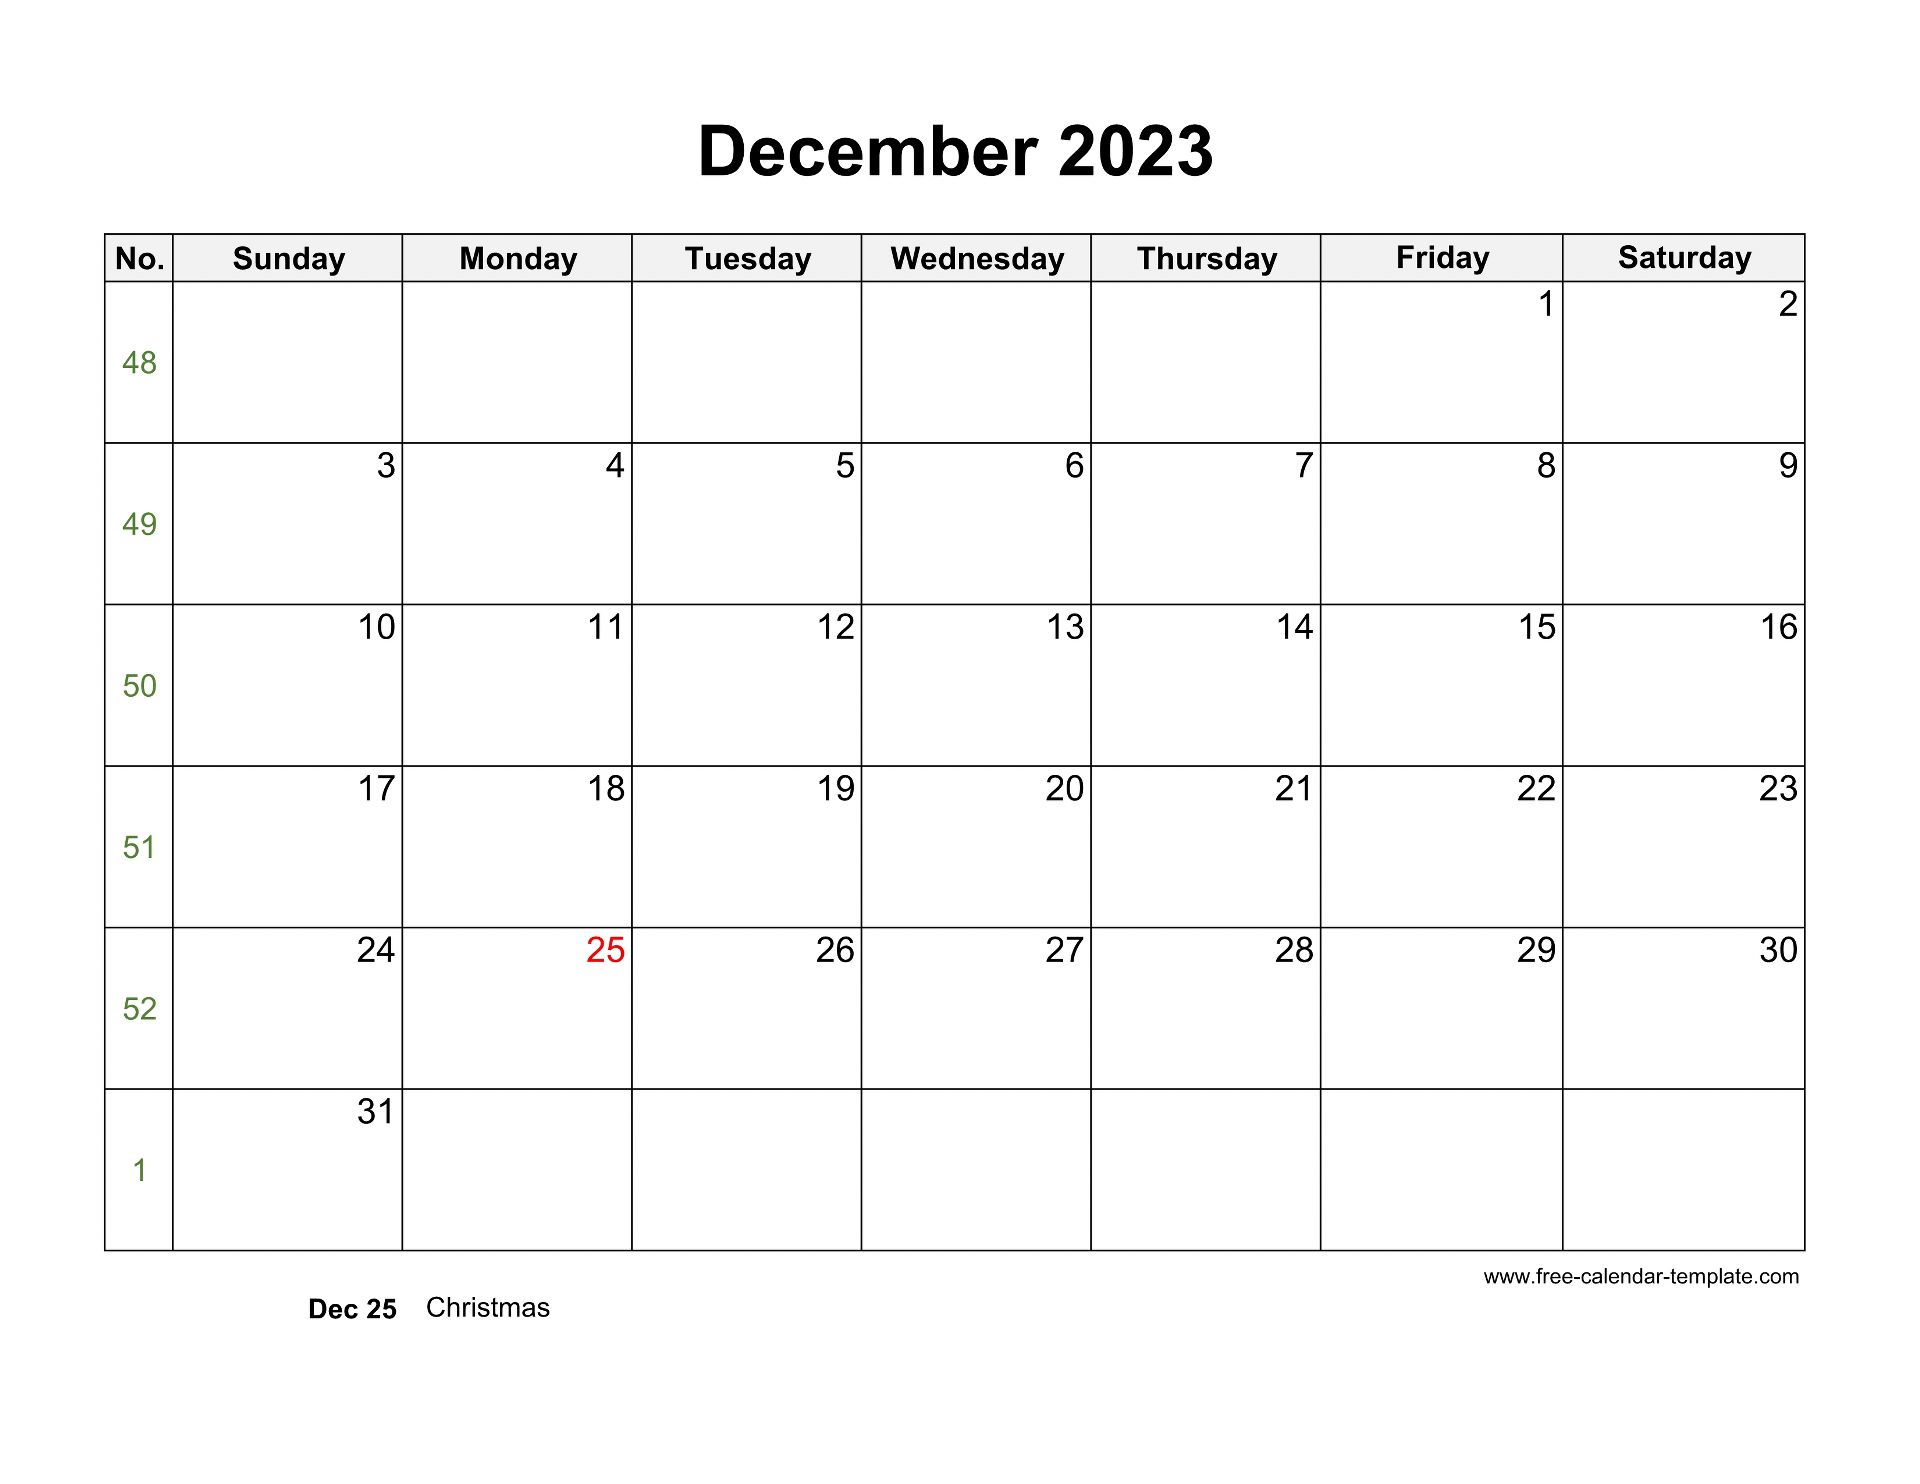 december-2023-calendar-free-blank-printable-with-holidays-images-and